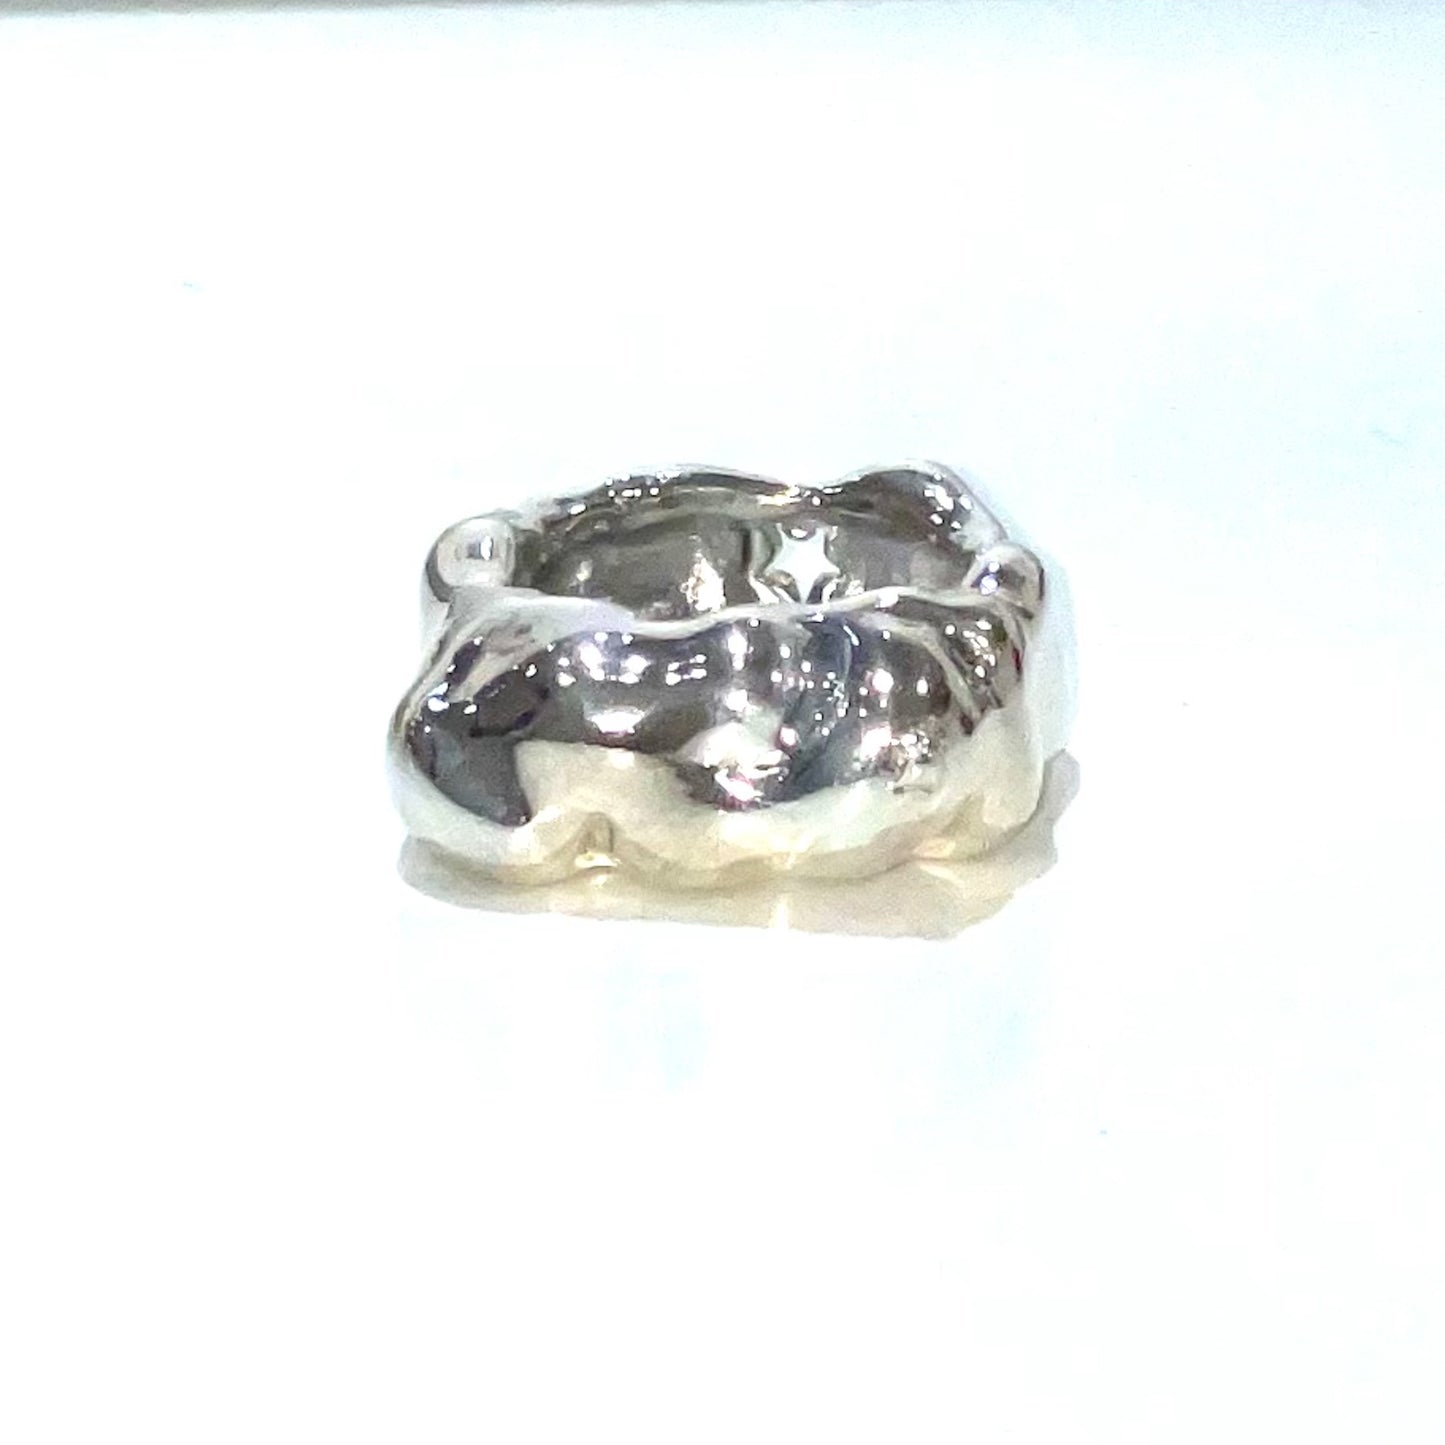 SHEEP RING / sterling silver / シープリング